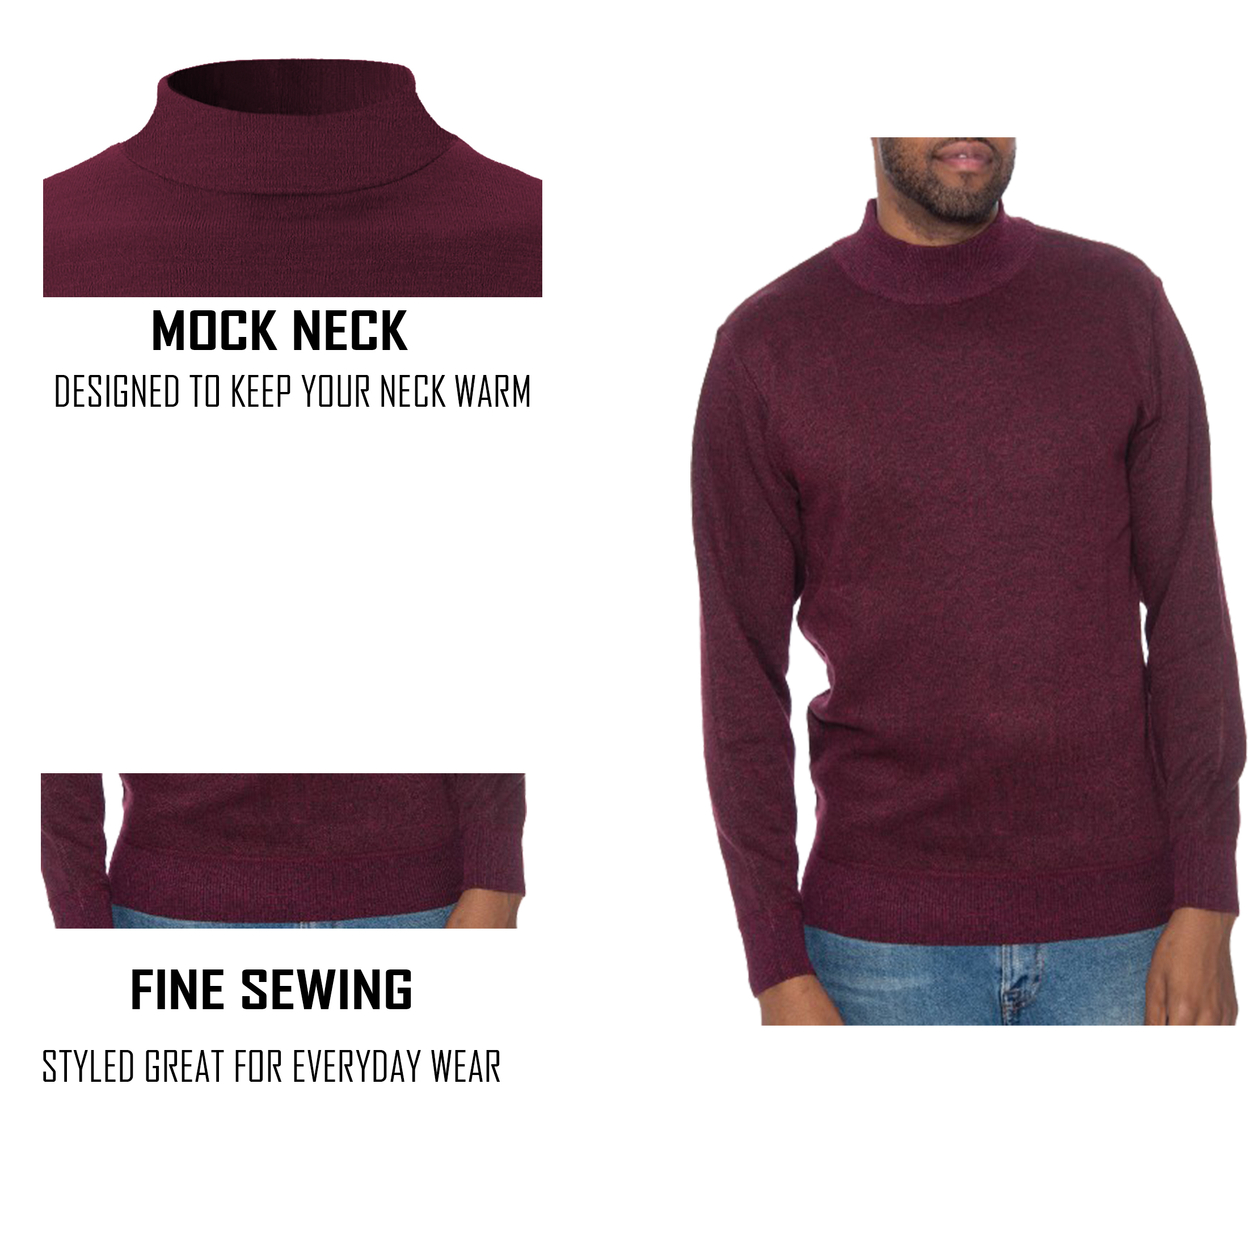 2-Pack: Men's Winter Warm Cozy Knit Slim Fit Mock Neck Sweater - White & Burgundy, Small